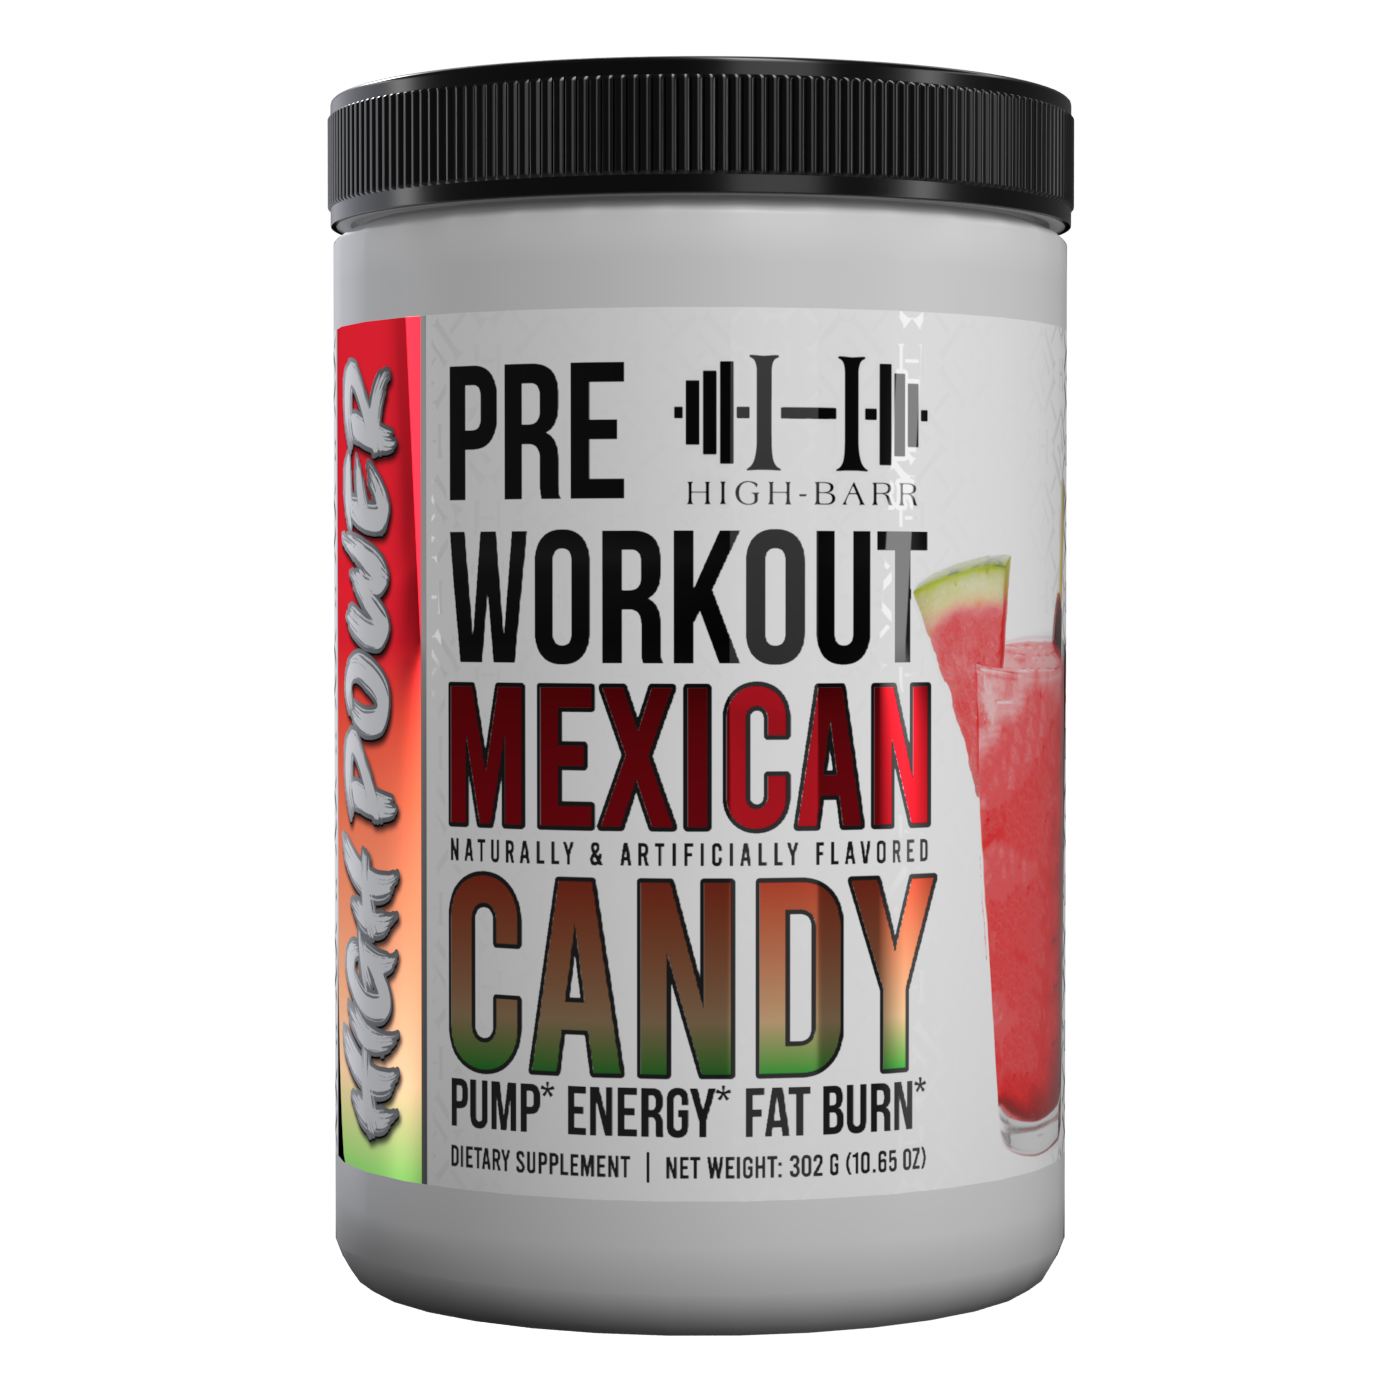 High-Power Pre-workout Mexican Candy